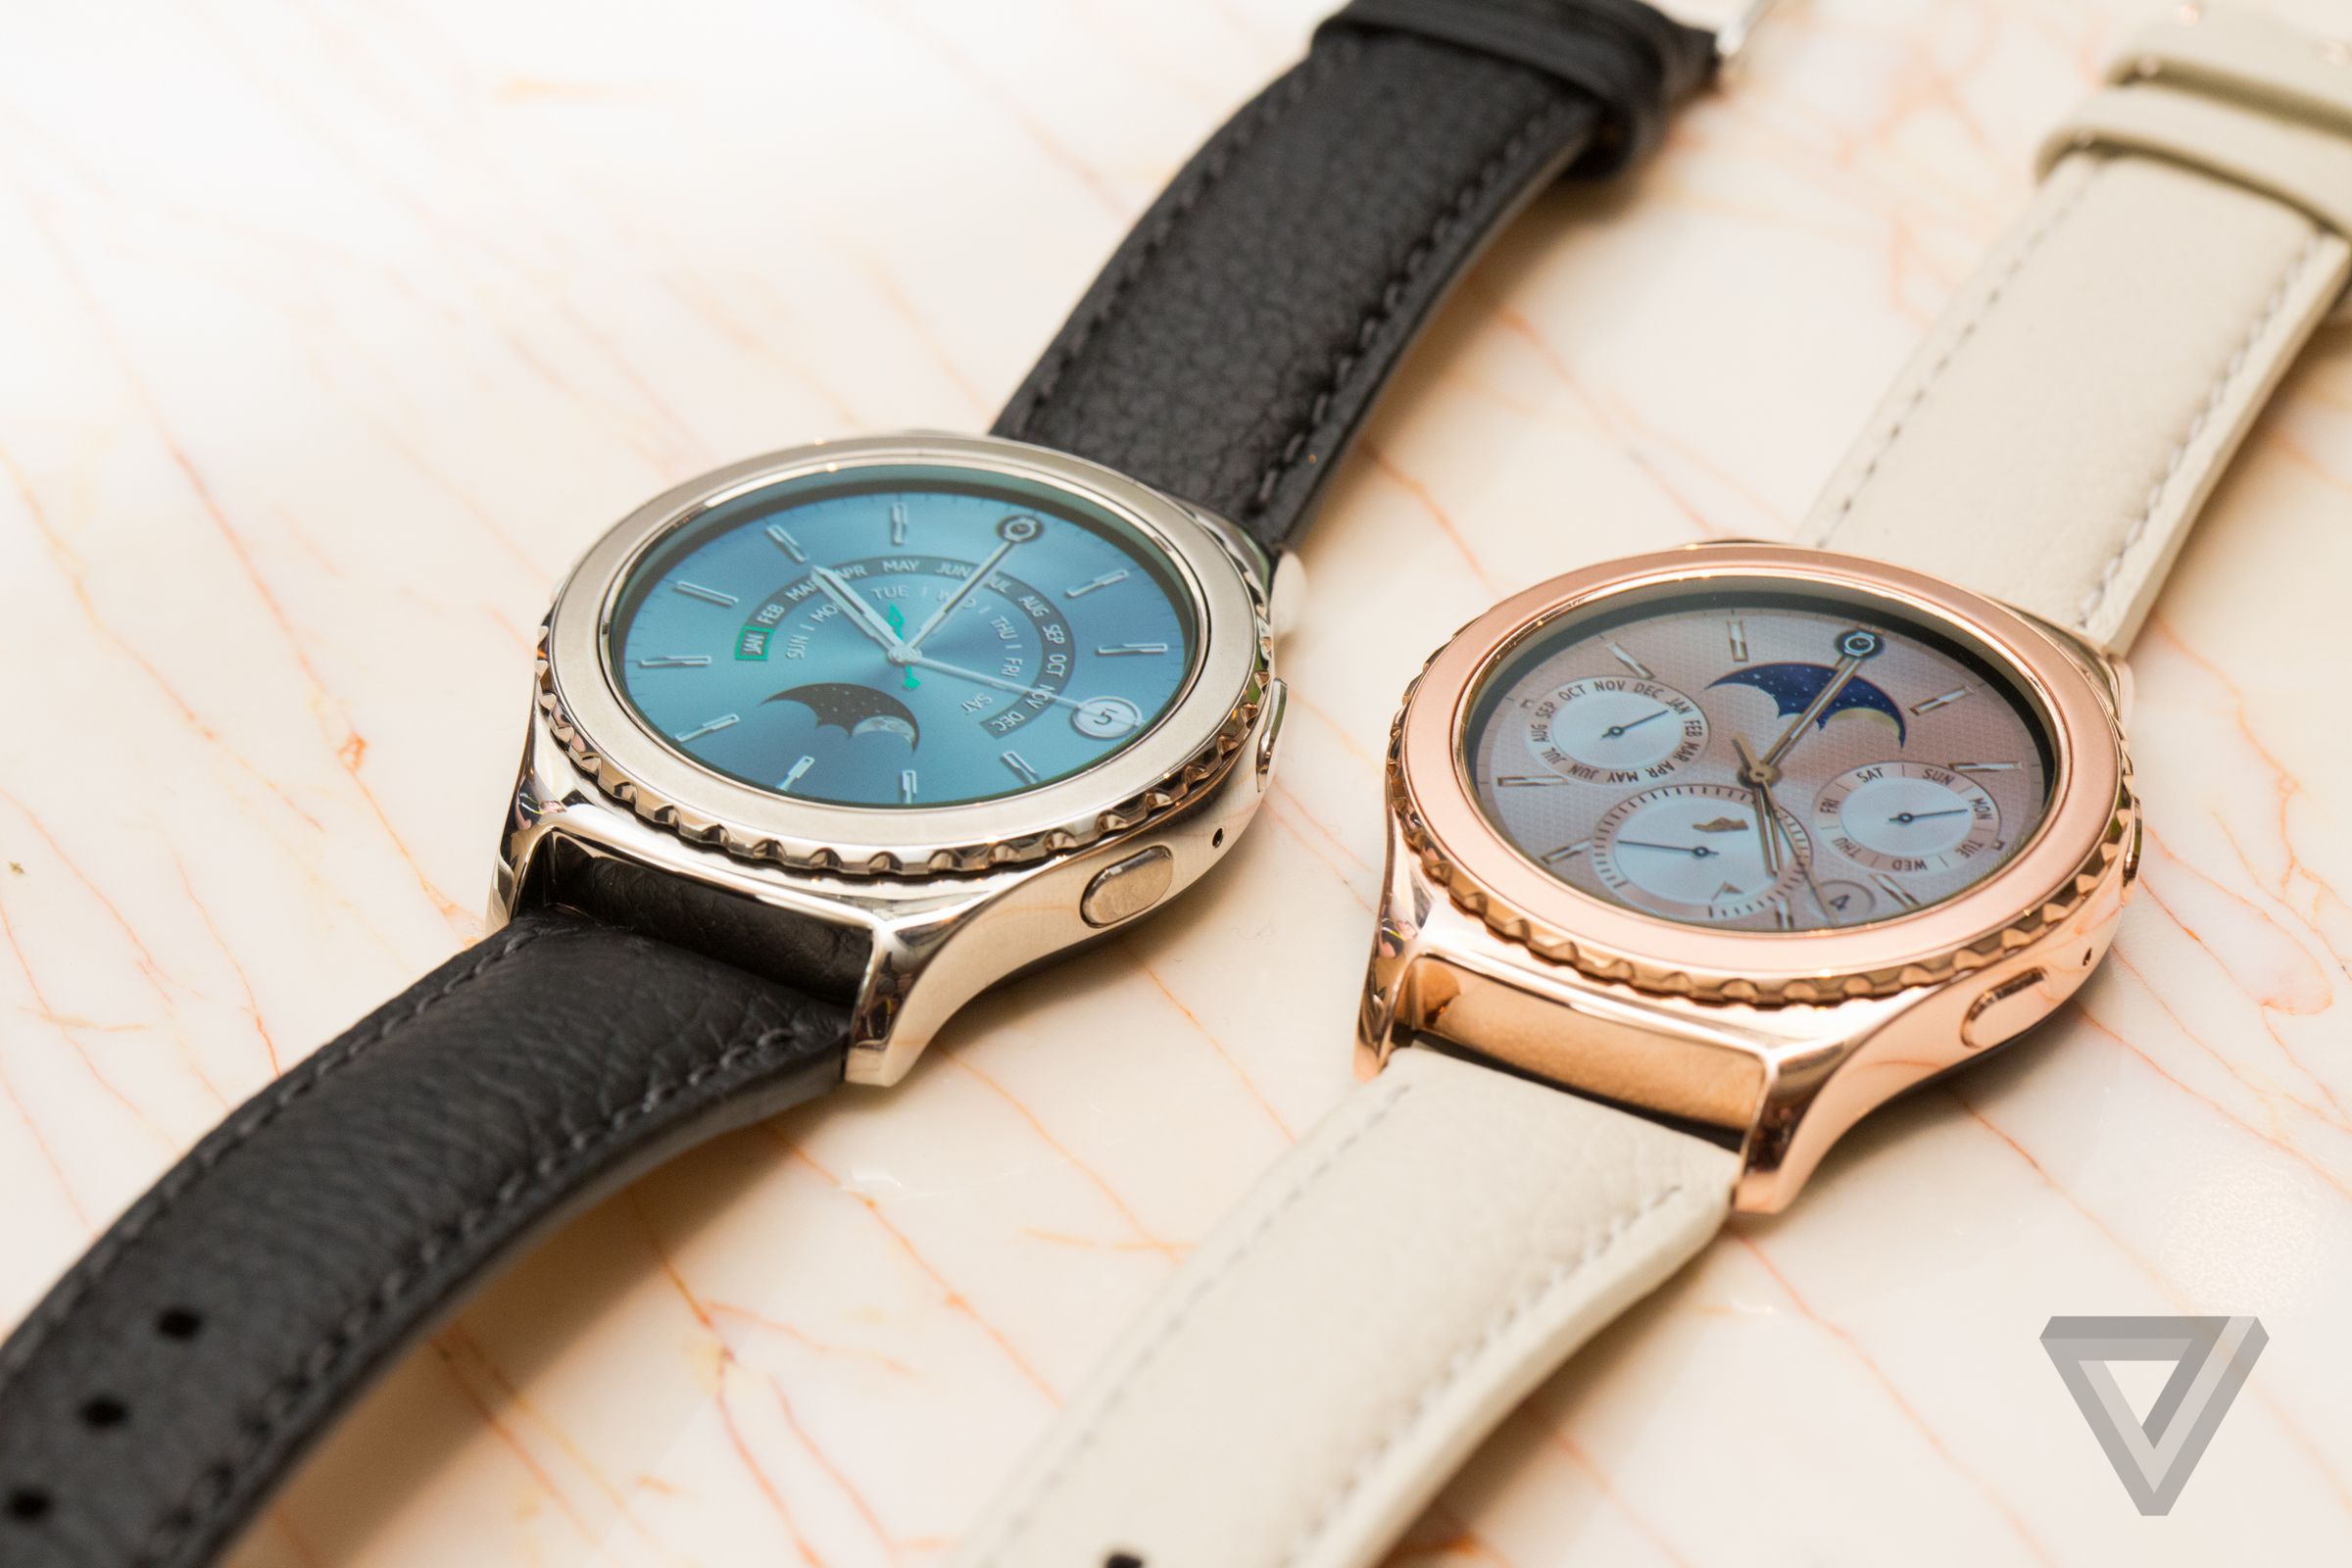 Samsung Gear S2 Classic gold and platinum